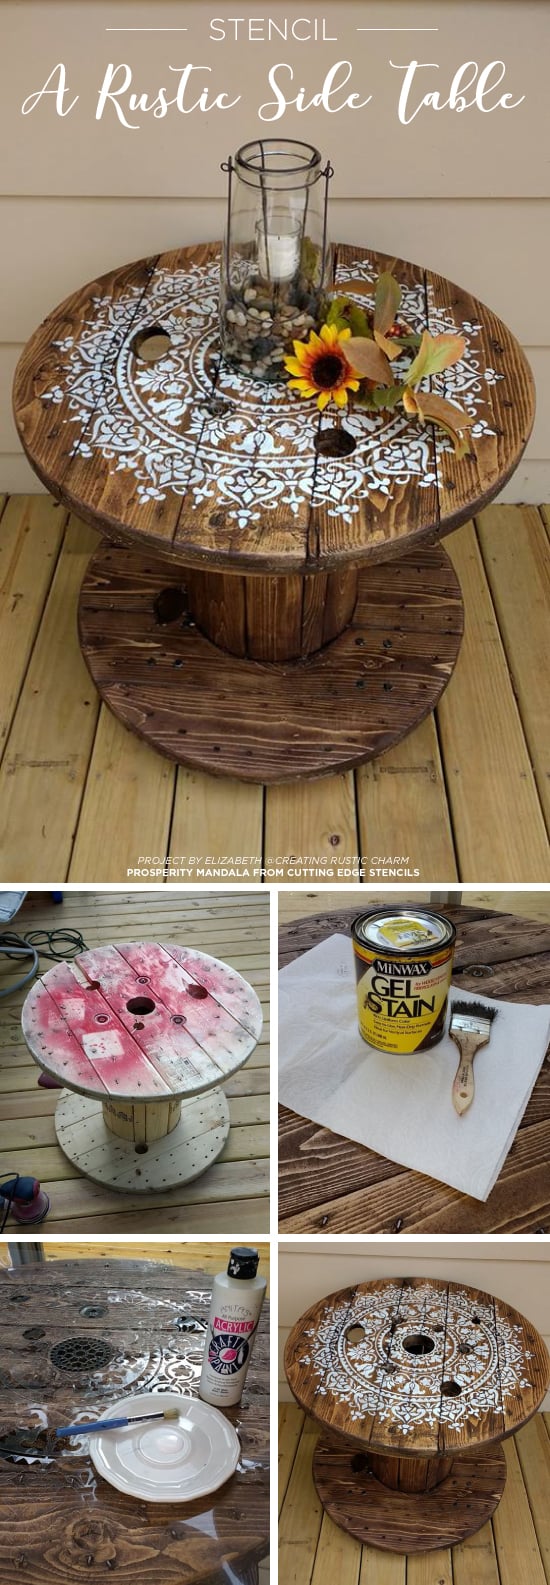 Cutting Edge Stencils shares how to upcycle a wooden spool into a table using the Prosperity Mandala pattern. http://www.cuttingedgestencils.com/prosperity-mandala-stencil-yoga-mandala-stencils-designs.html